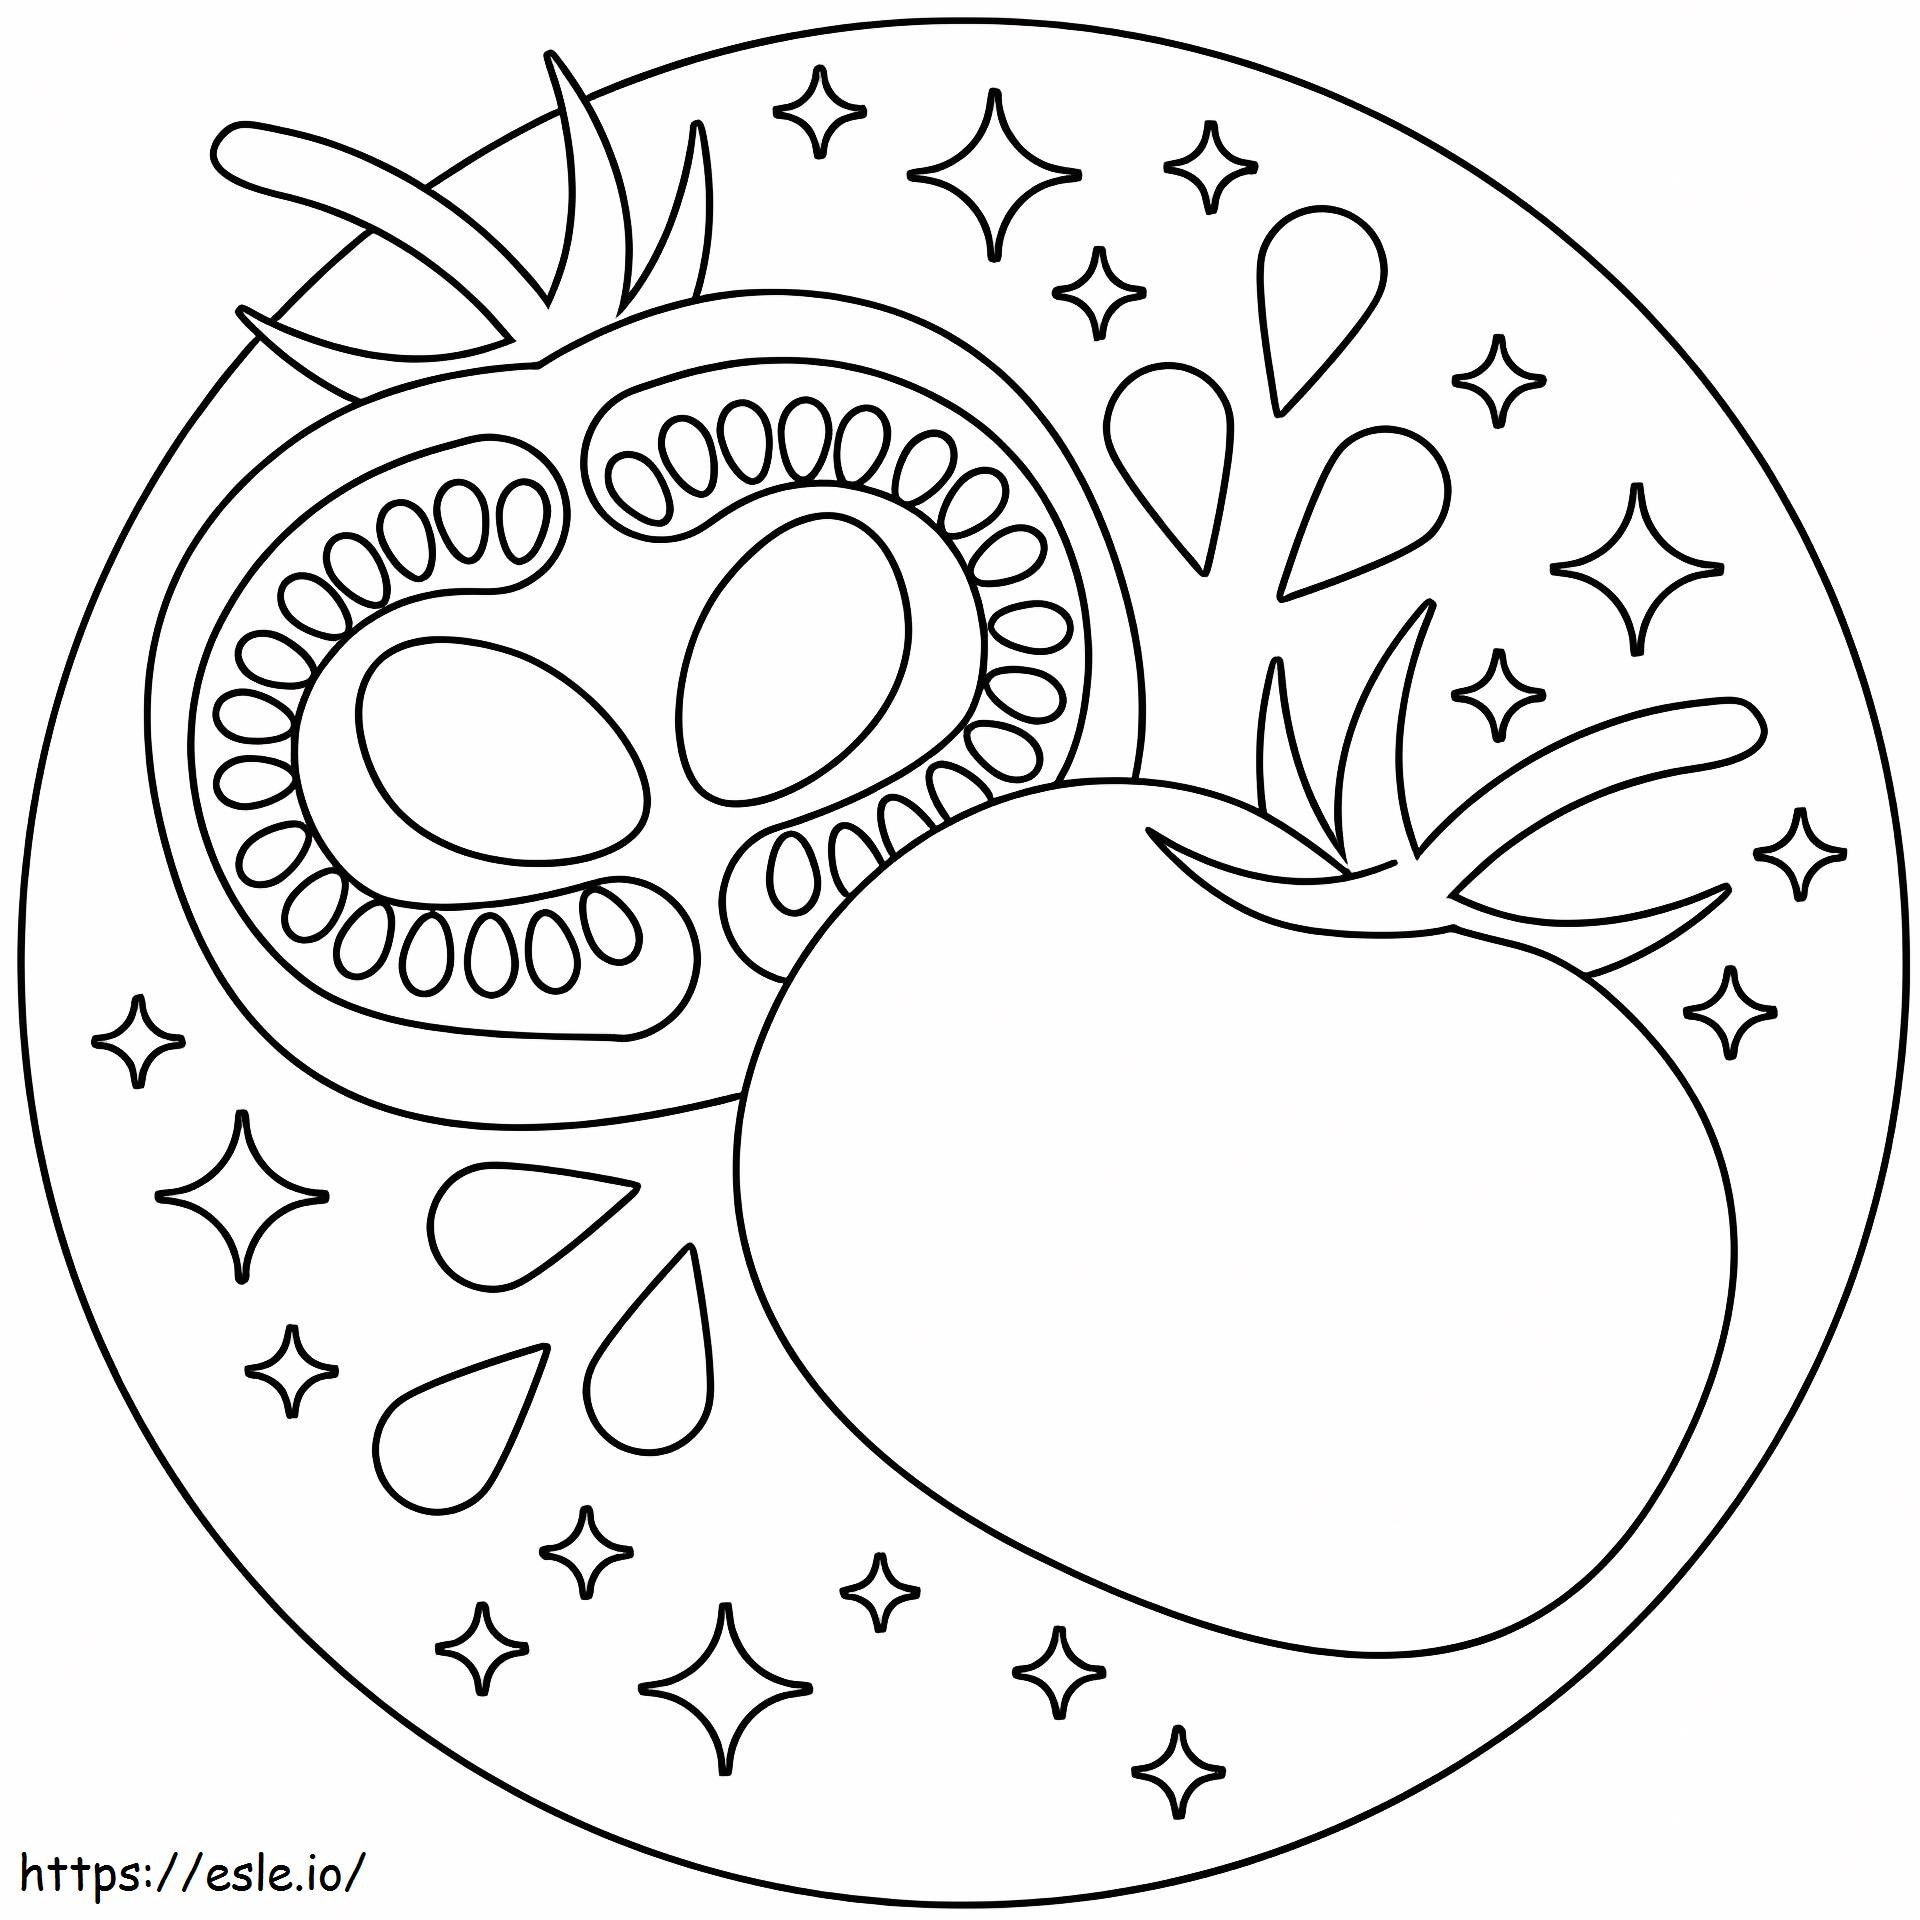 Fresh Tomato coloring page